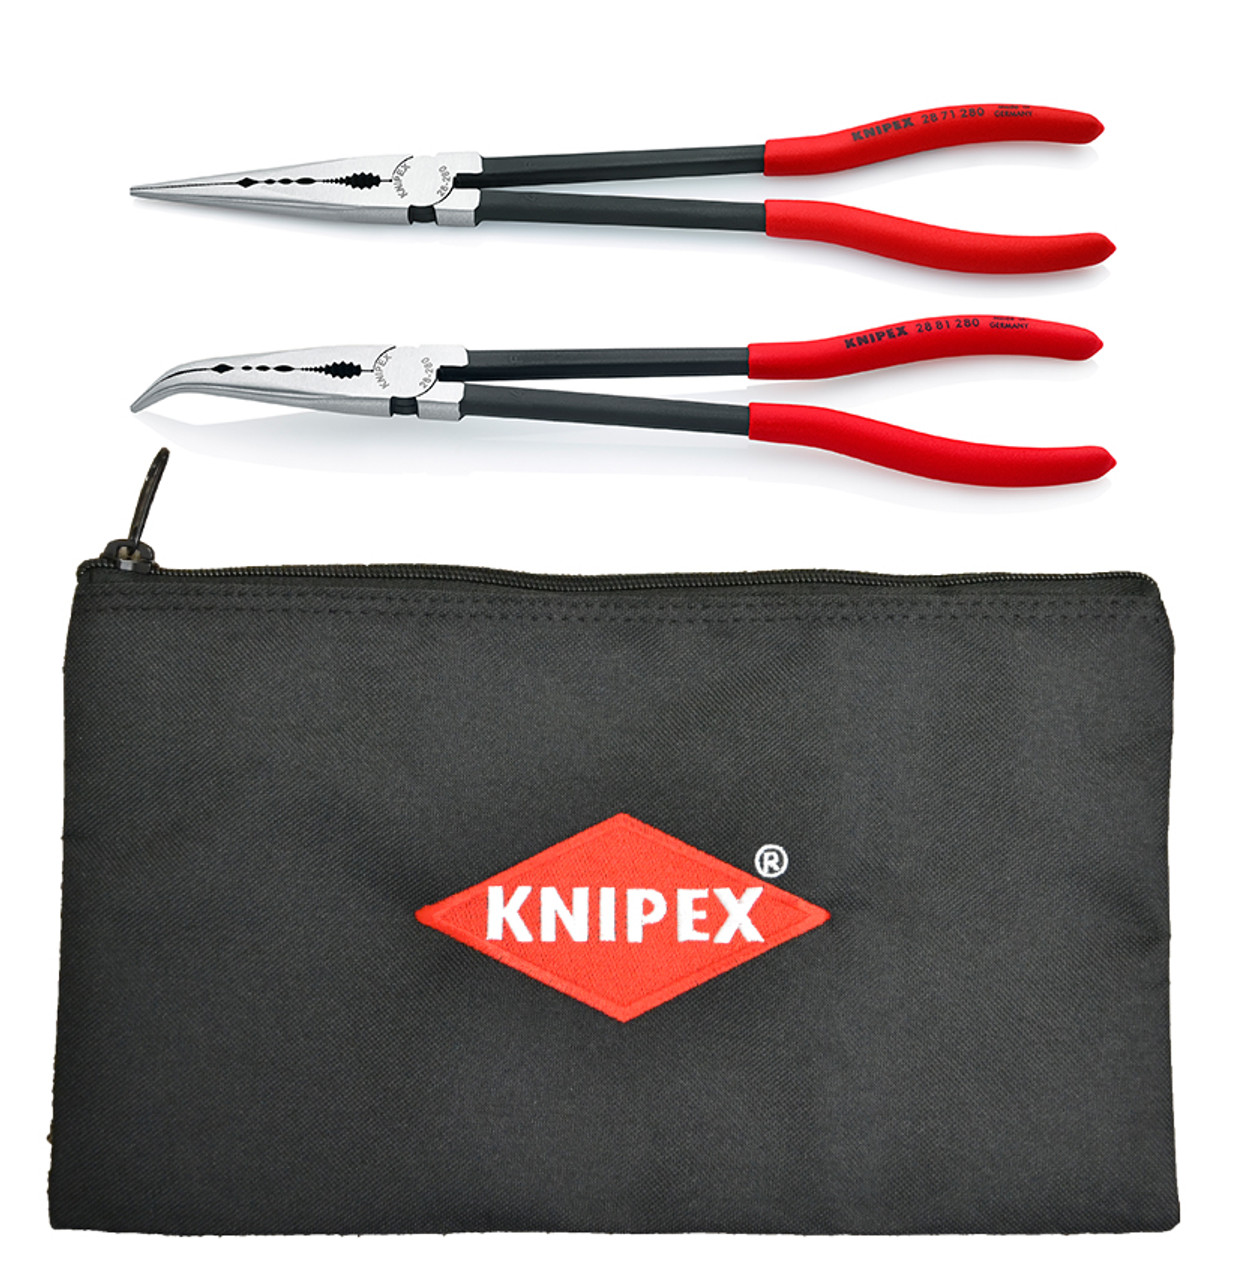 Knipex 9K 00 80 128 US KN, 2 Pc Extra Long Needle Nose Pliers Set w/  Keeper Pouch (28 71 280, 28 81 280 and 9K 00 90 12 US)